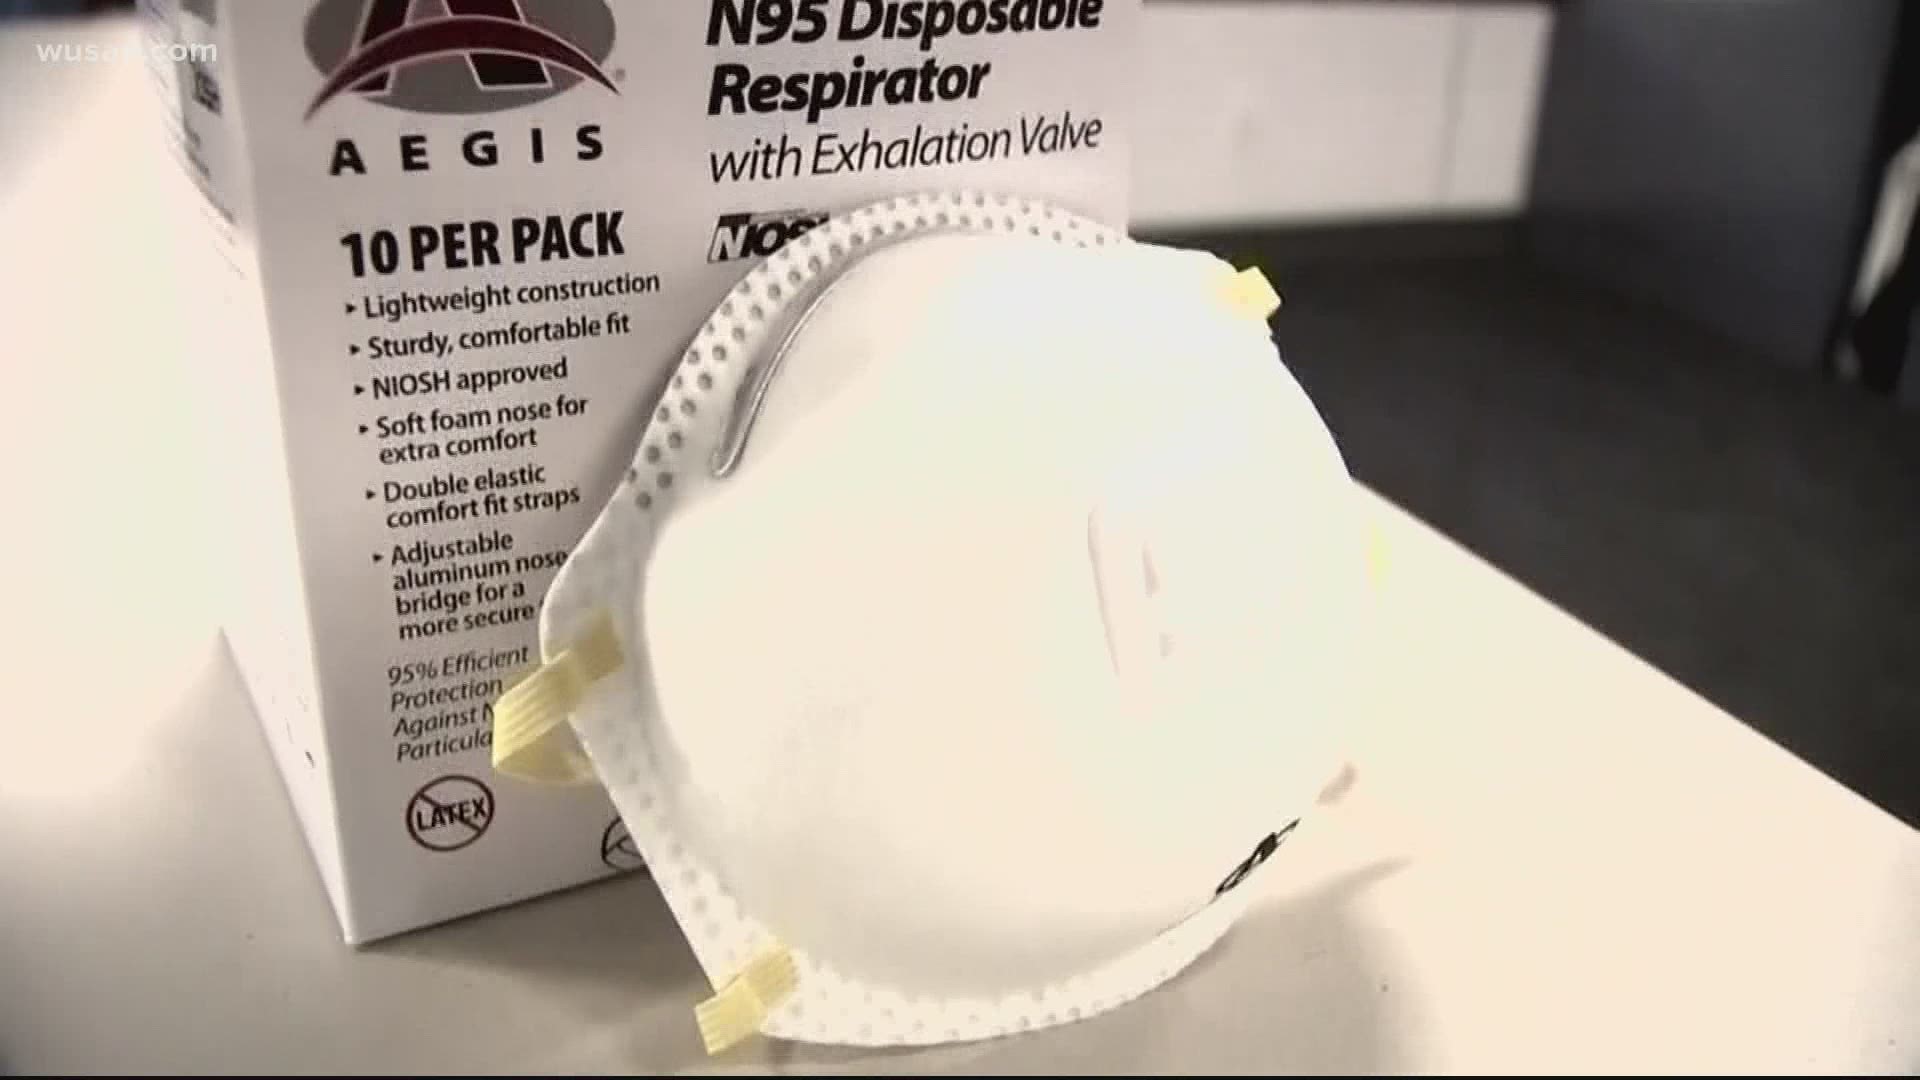 Loudoun County was expecting 30,000 N95 respirators and was outbid by the federal government.